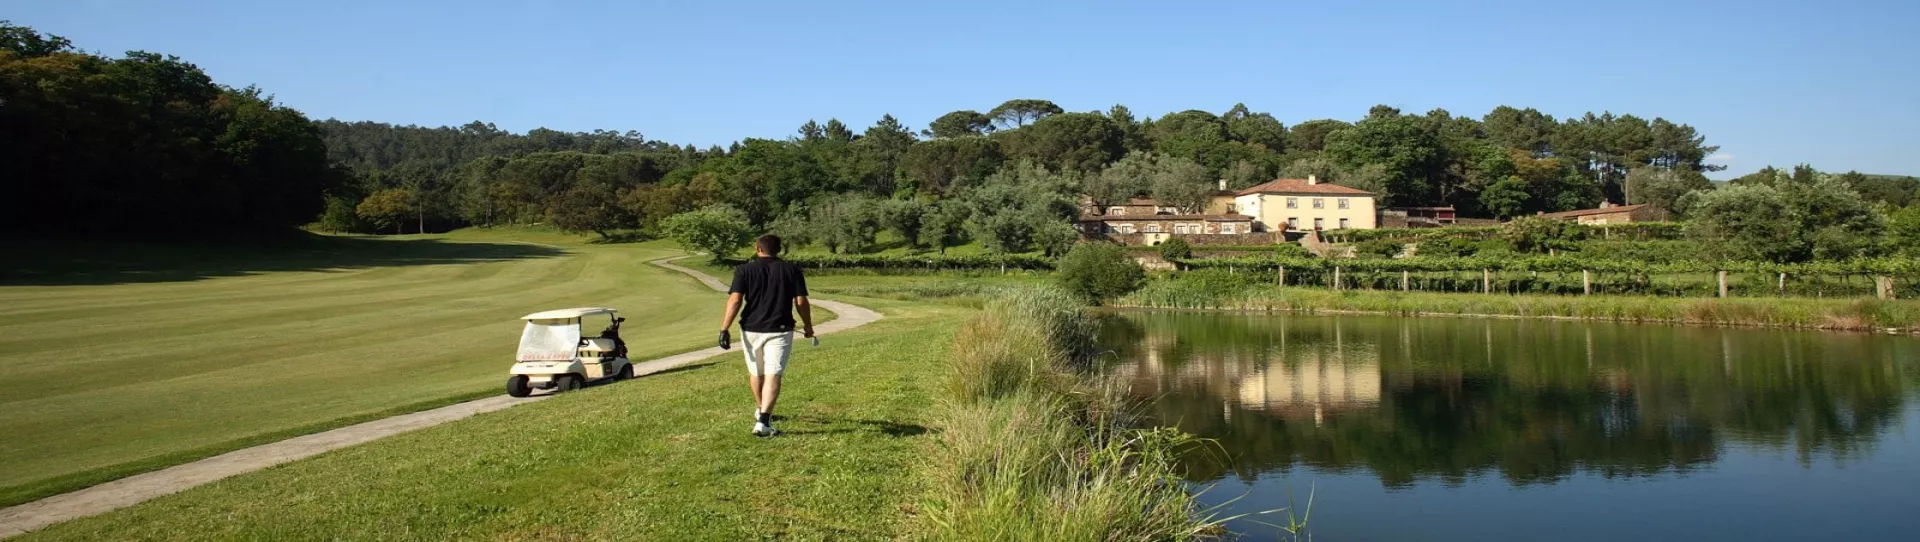 Portugal golf holidays - 7 Nights BB & 3 Days Unlimited Golf Rounds - Photo 1